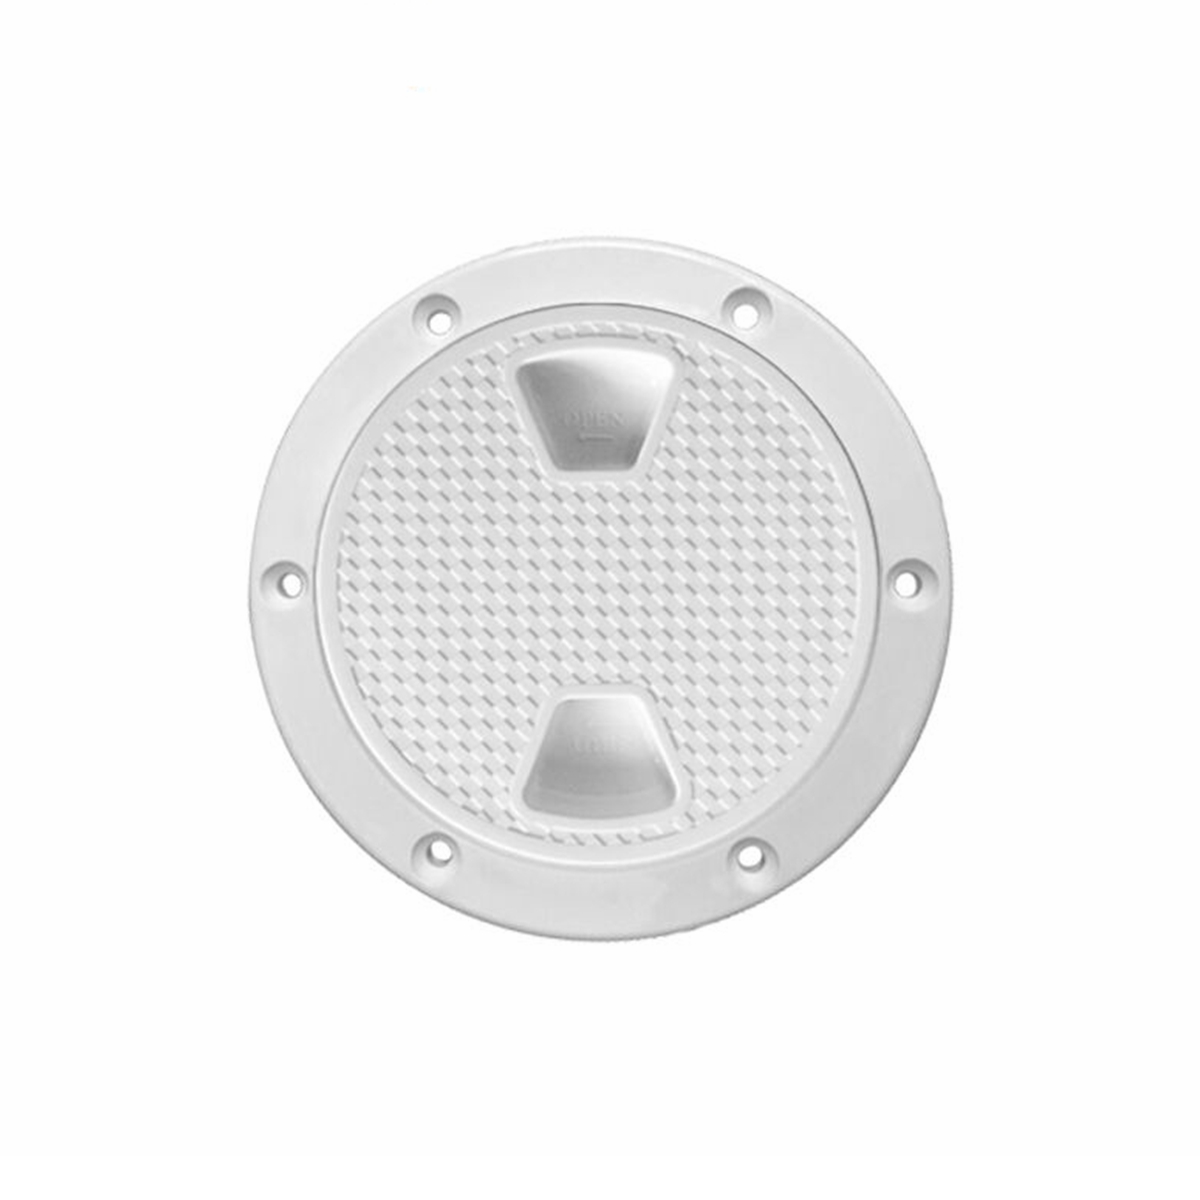 

BSET MATEL 6inch White Screw Out Inspection Deck Plate Hatch Marine Boat Yacht Detachable Cover Rv Plastic